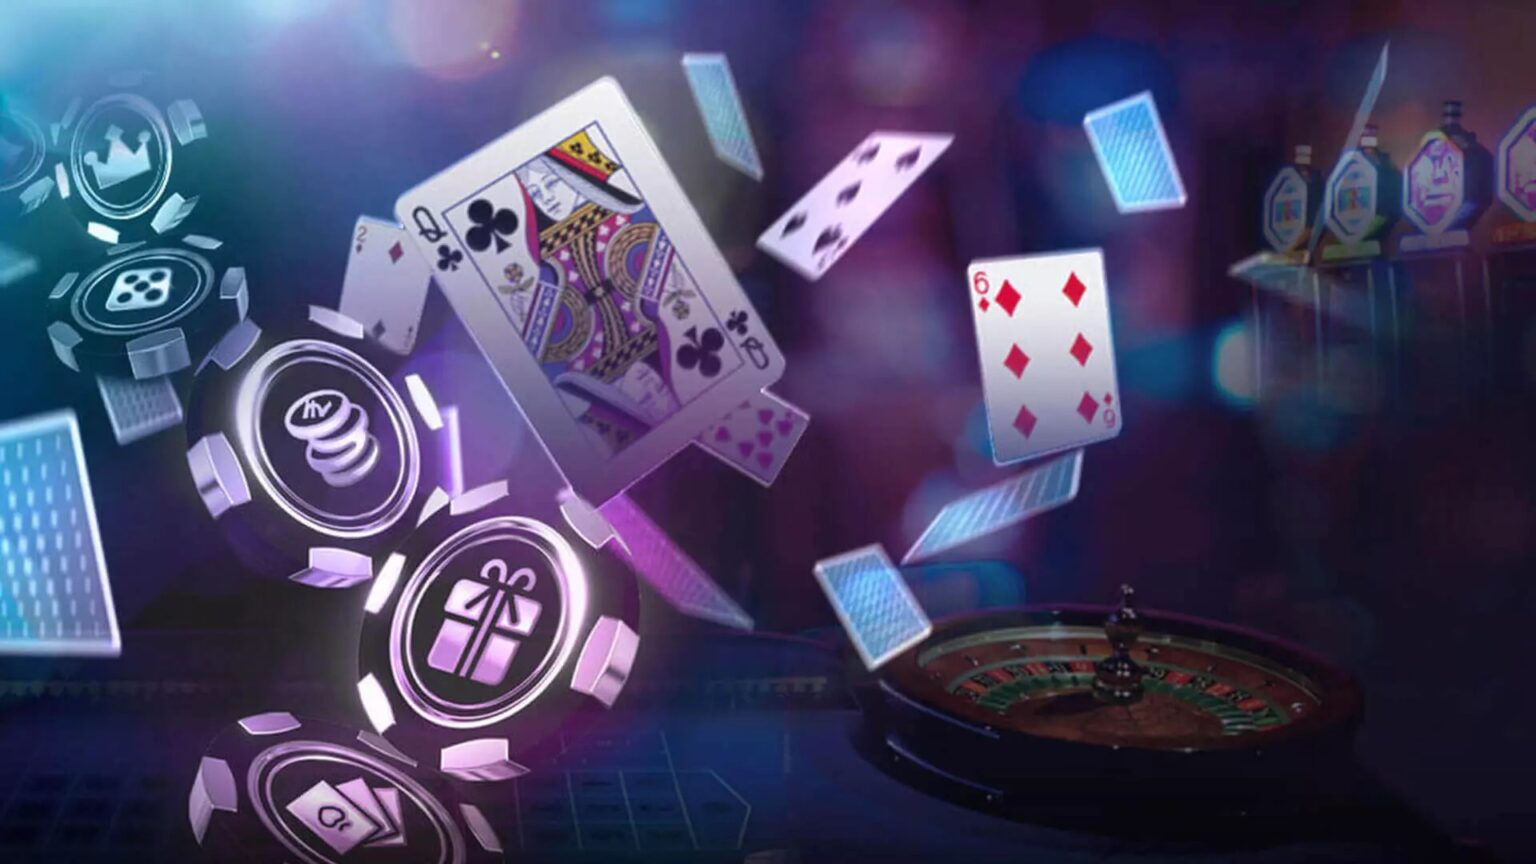 Online casino games are more popular than ever before, but are they actually safe to use and play? Get the inside scoop and start earning today.